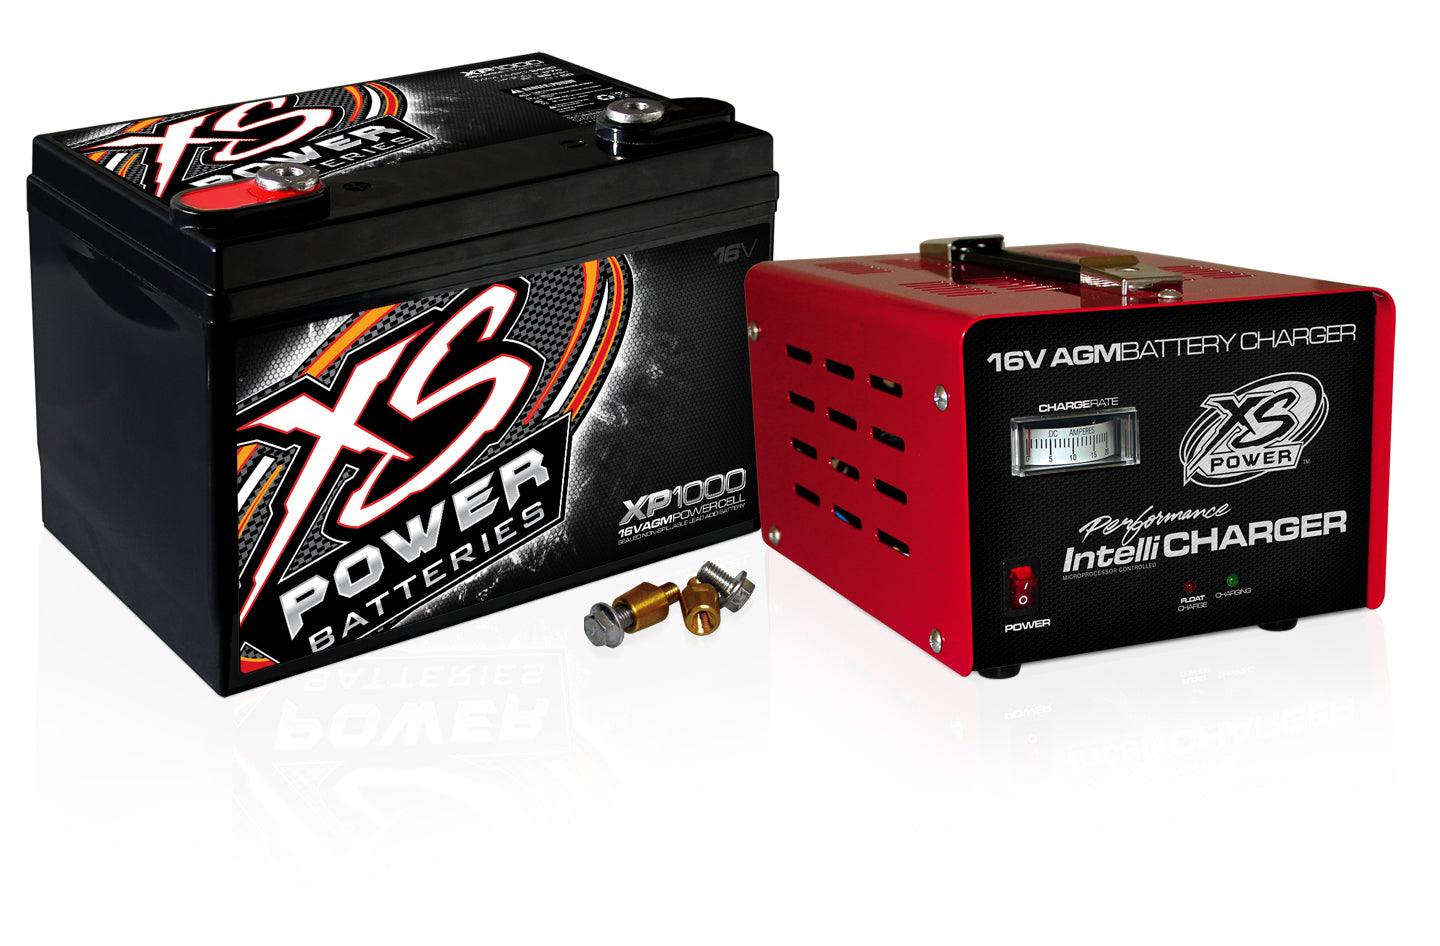 AGM Battery 16V 2 Post w/15A IntelliCharger - Burlile Performance Products